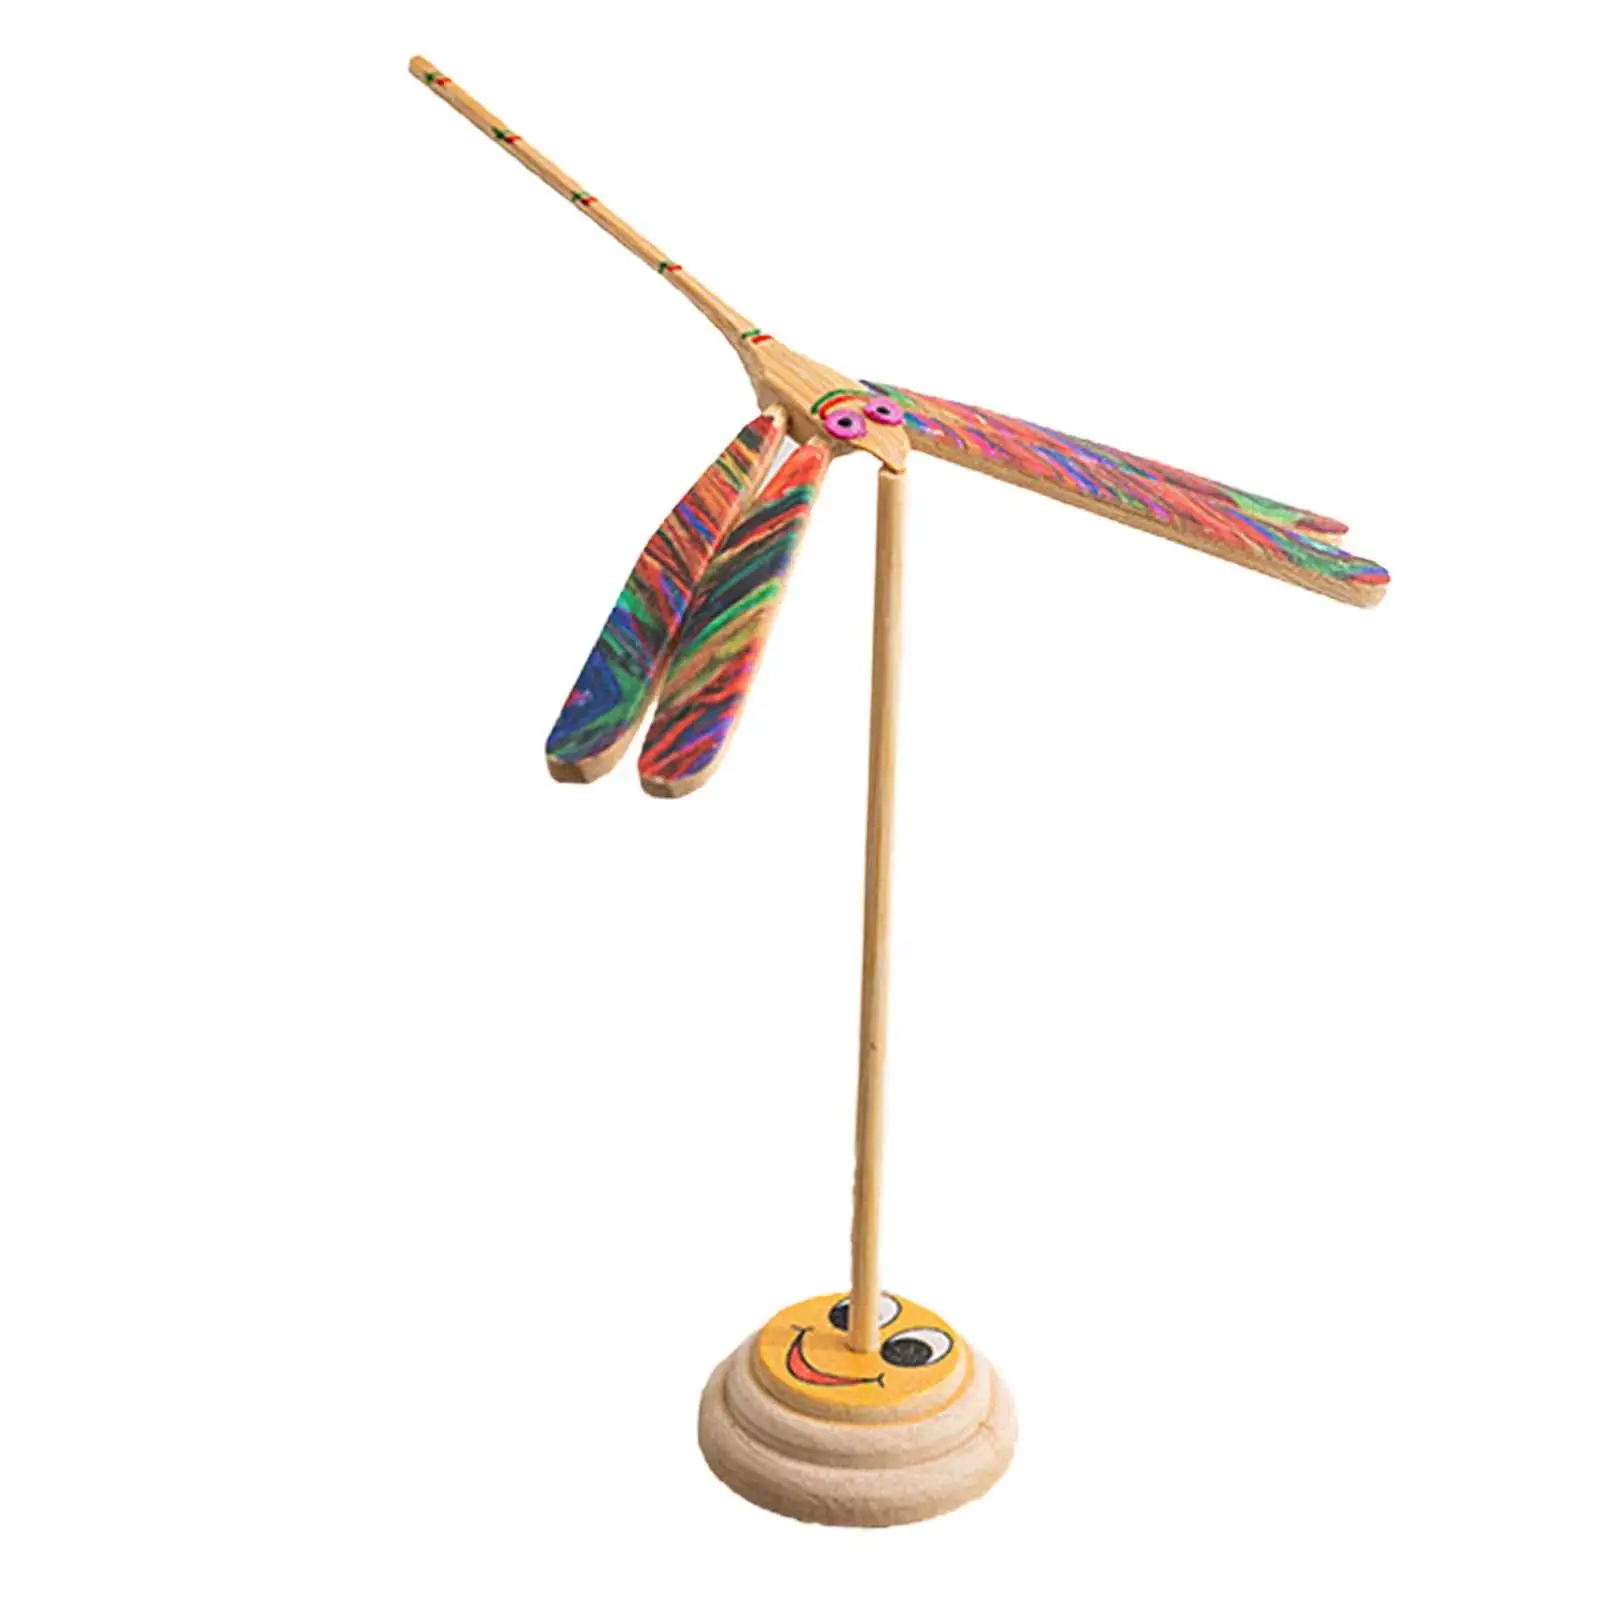 Flying Helicopter Toy Ornaments Nostalgic with Stable Base Bamboo Dragonfly Toy for Bedroom Gift Countertop Home Decor Birthdays